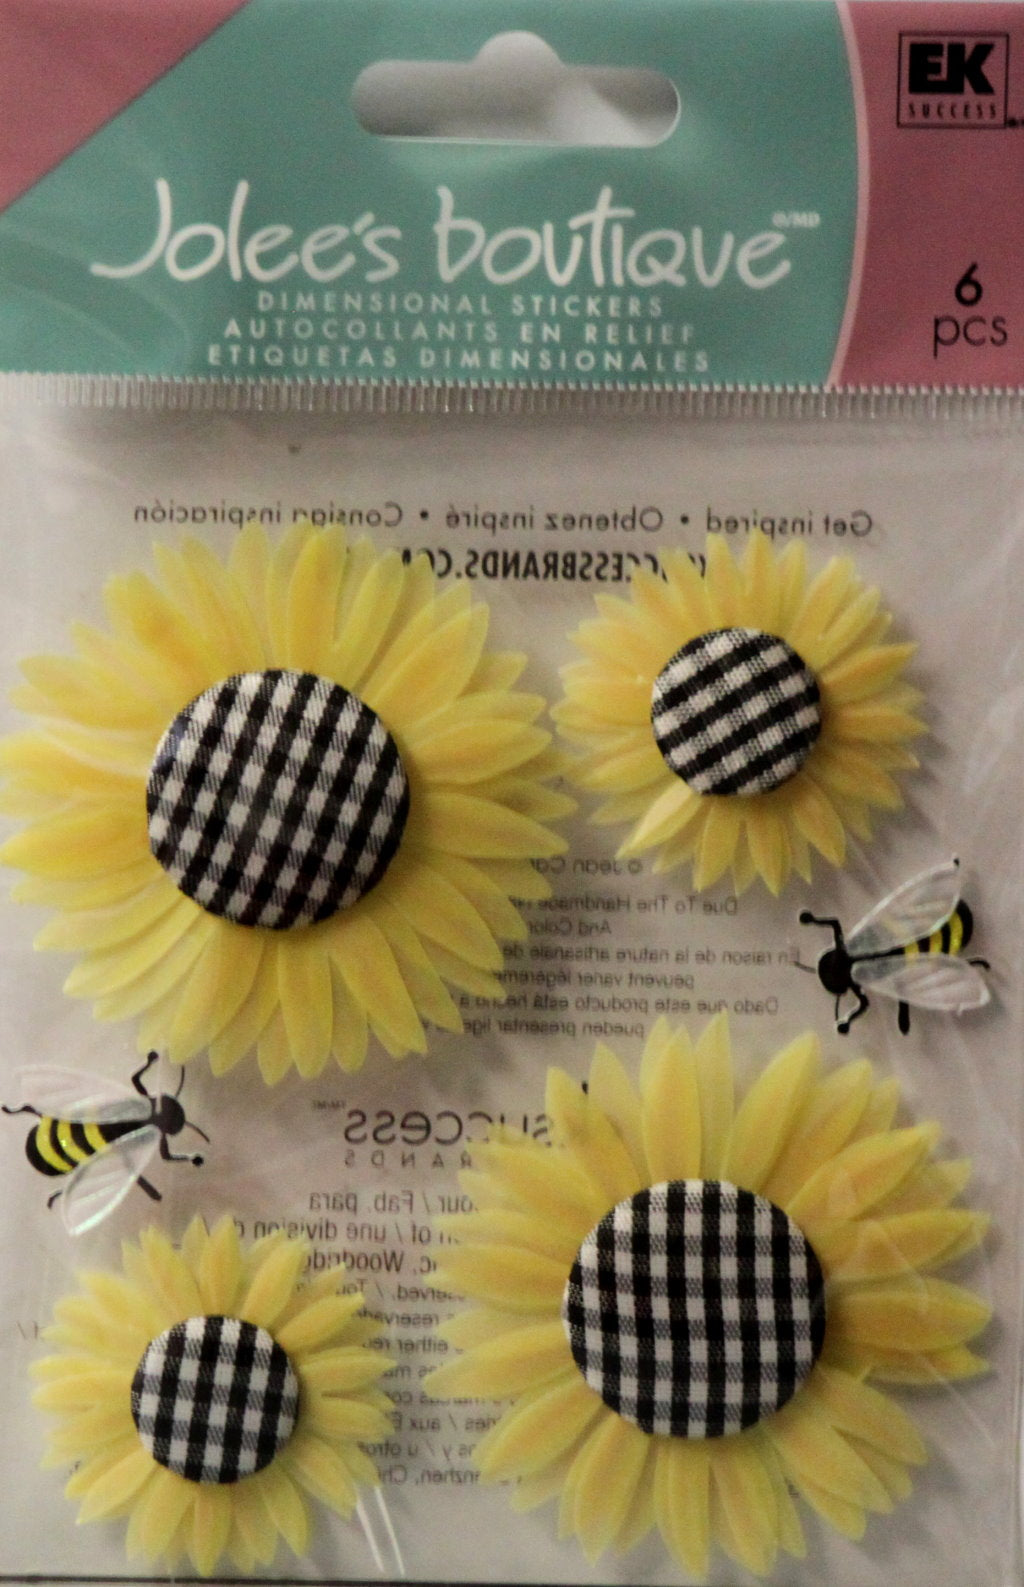 Jolee's Boutique Sunflowers Dimensional Stickers